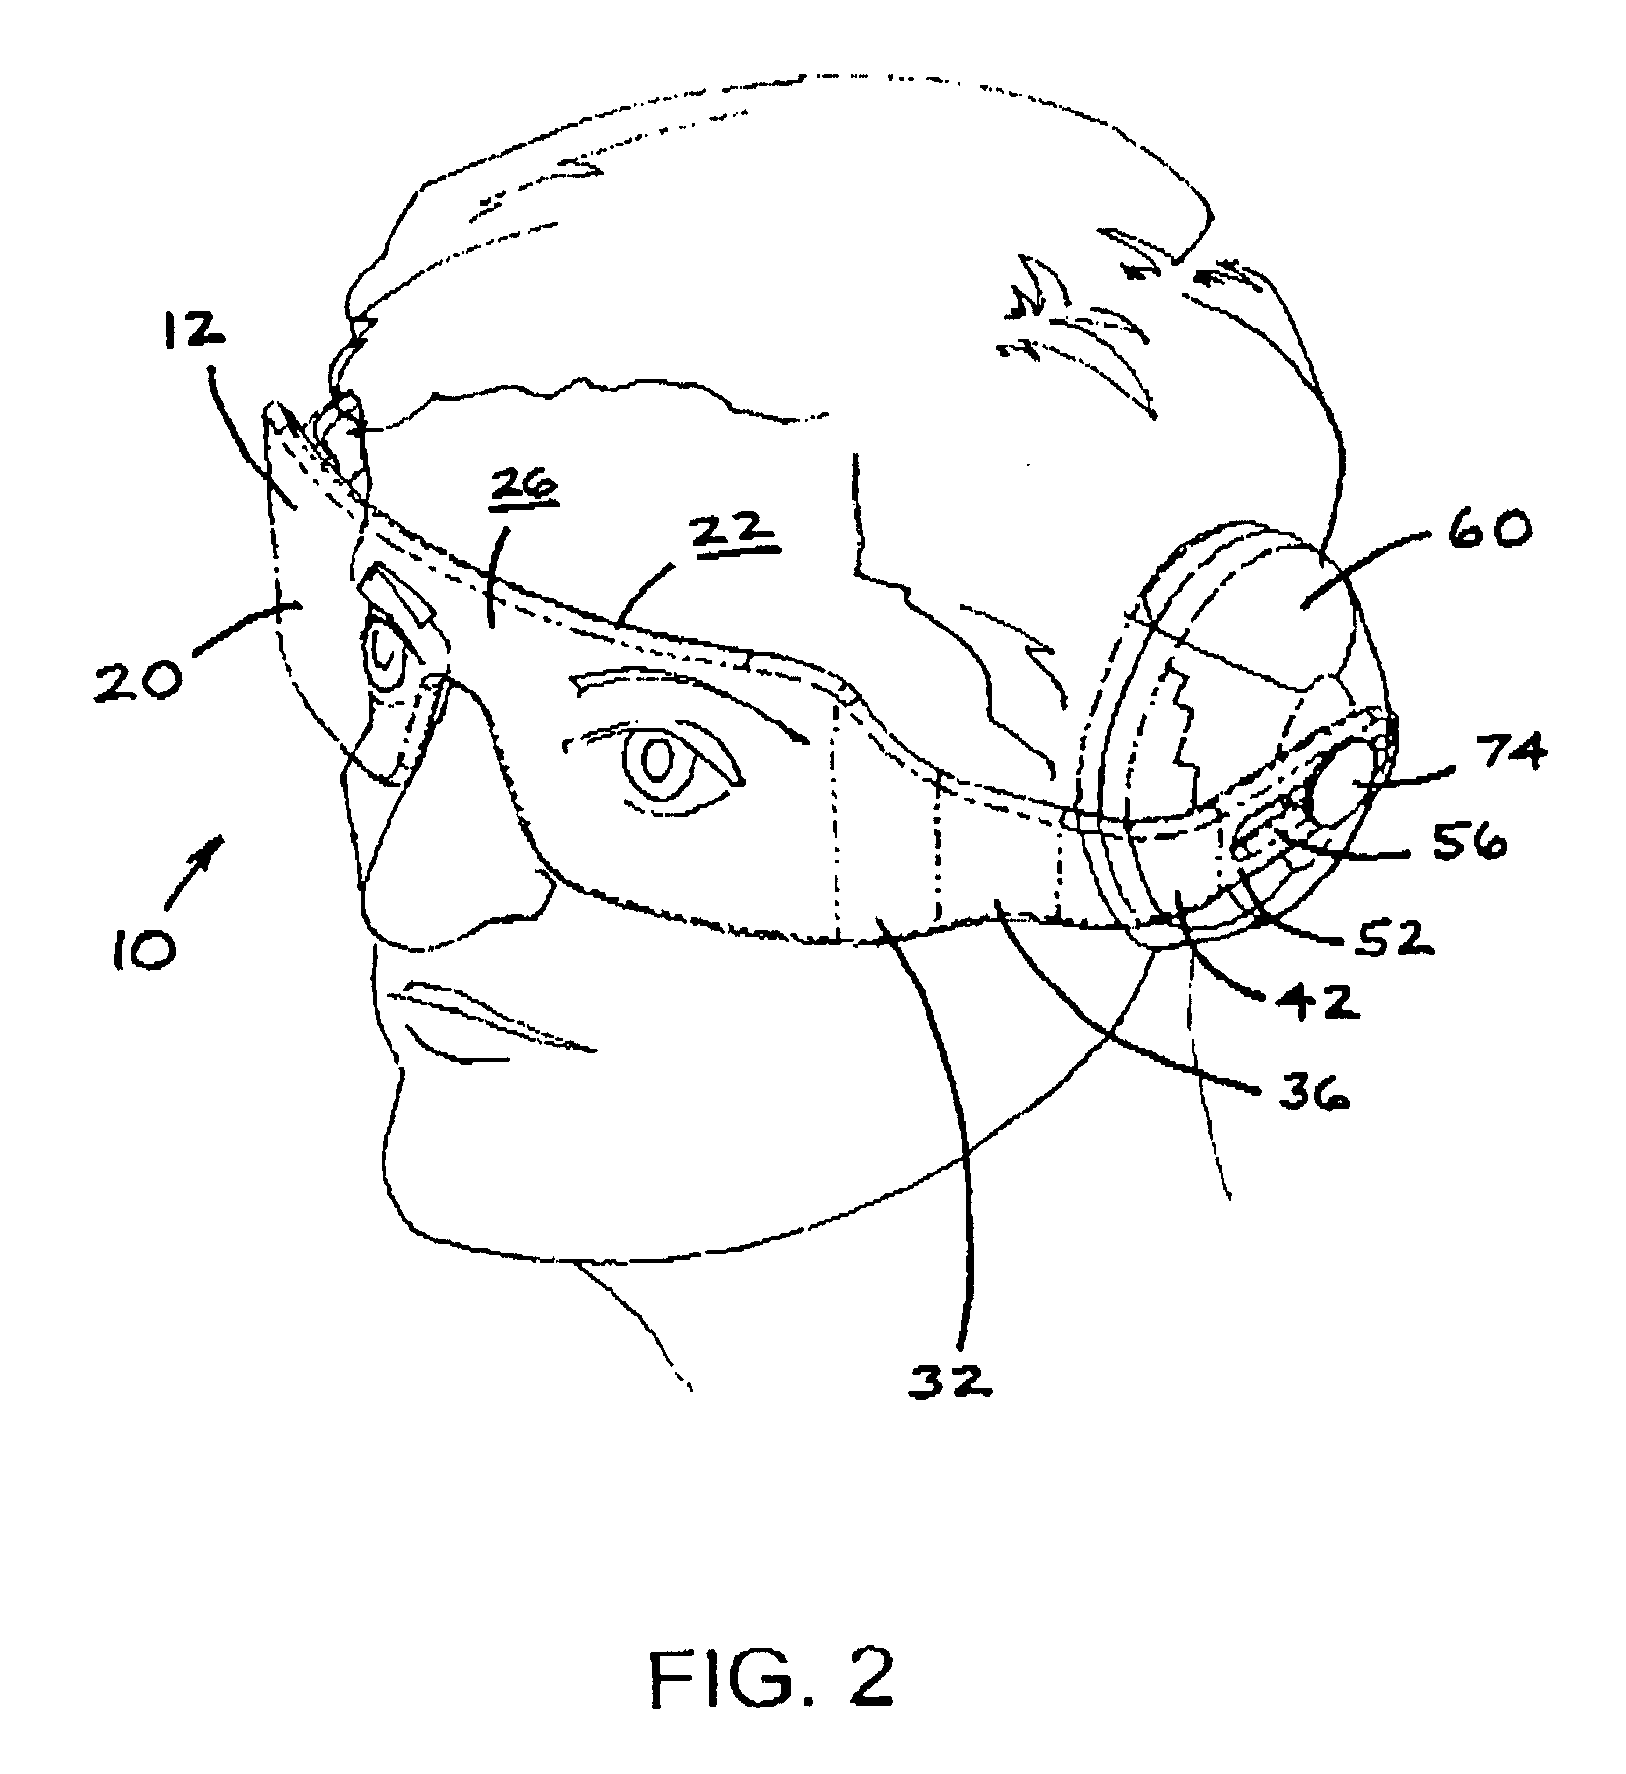 Eye and ear protection apparatus